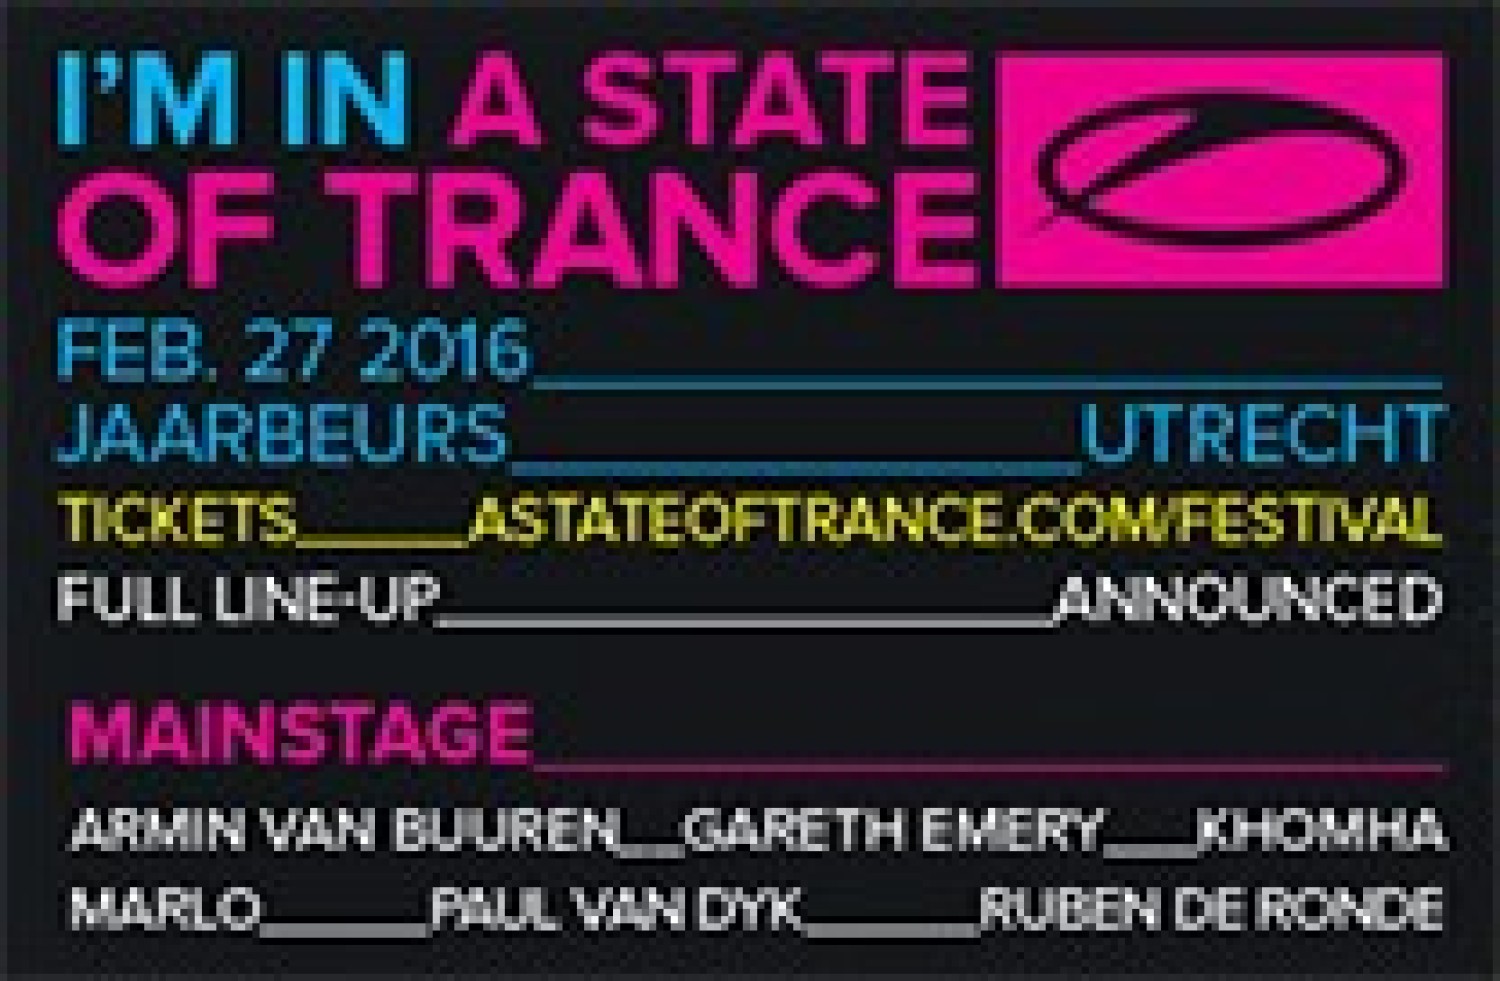 Party report: A State of Trance Festival, Utrecht (27-02-2016)